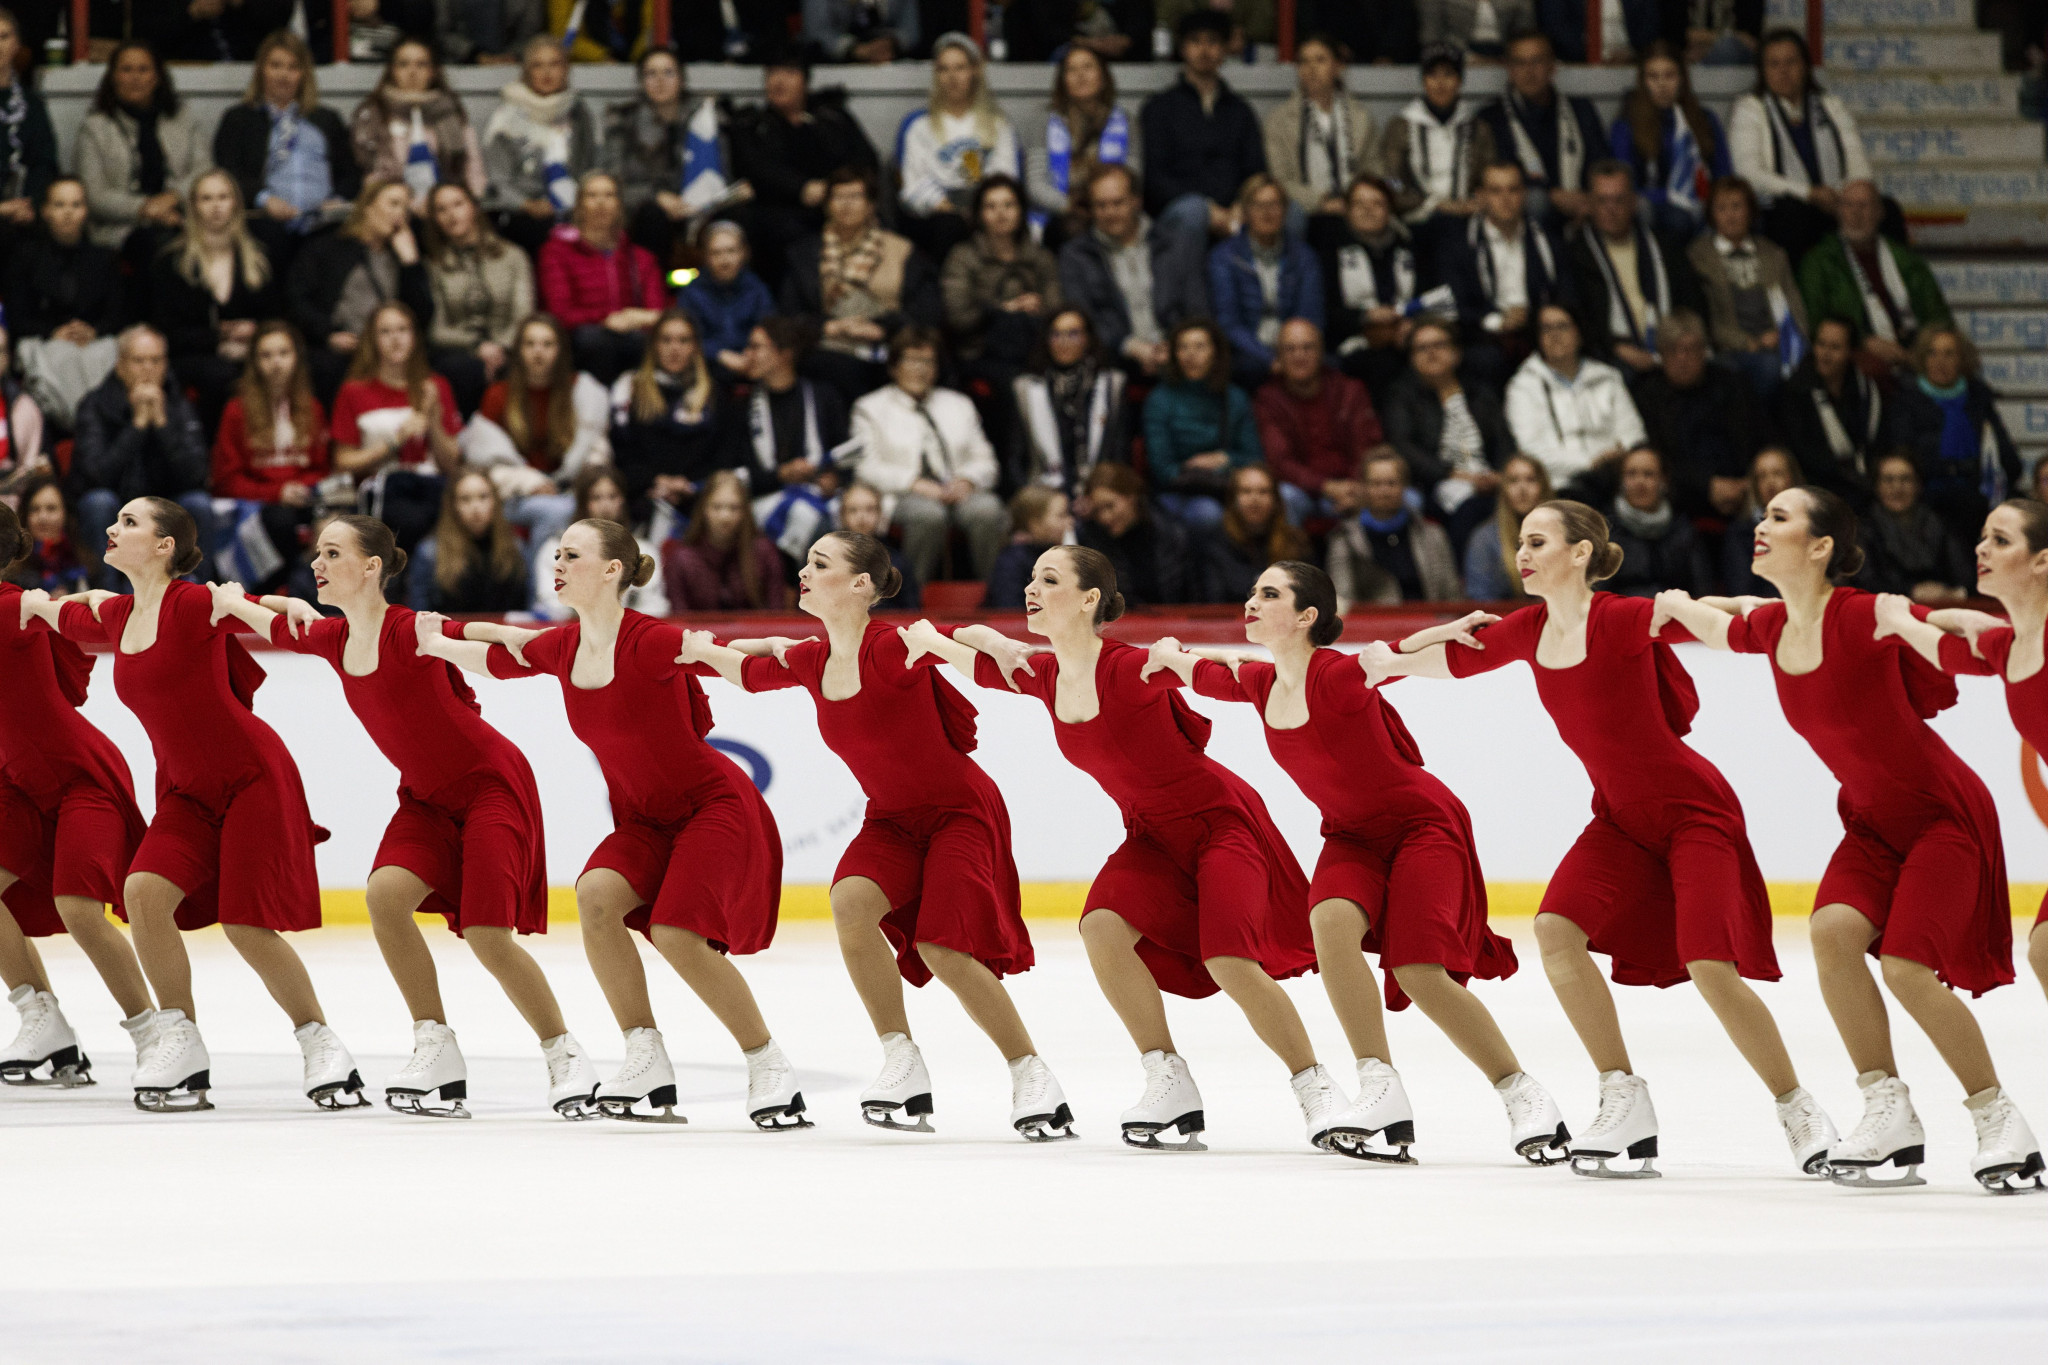 Canadian teams can look forward to competing on home ice at the 2022 World Synchronized Skating Championships ©Getty Images